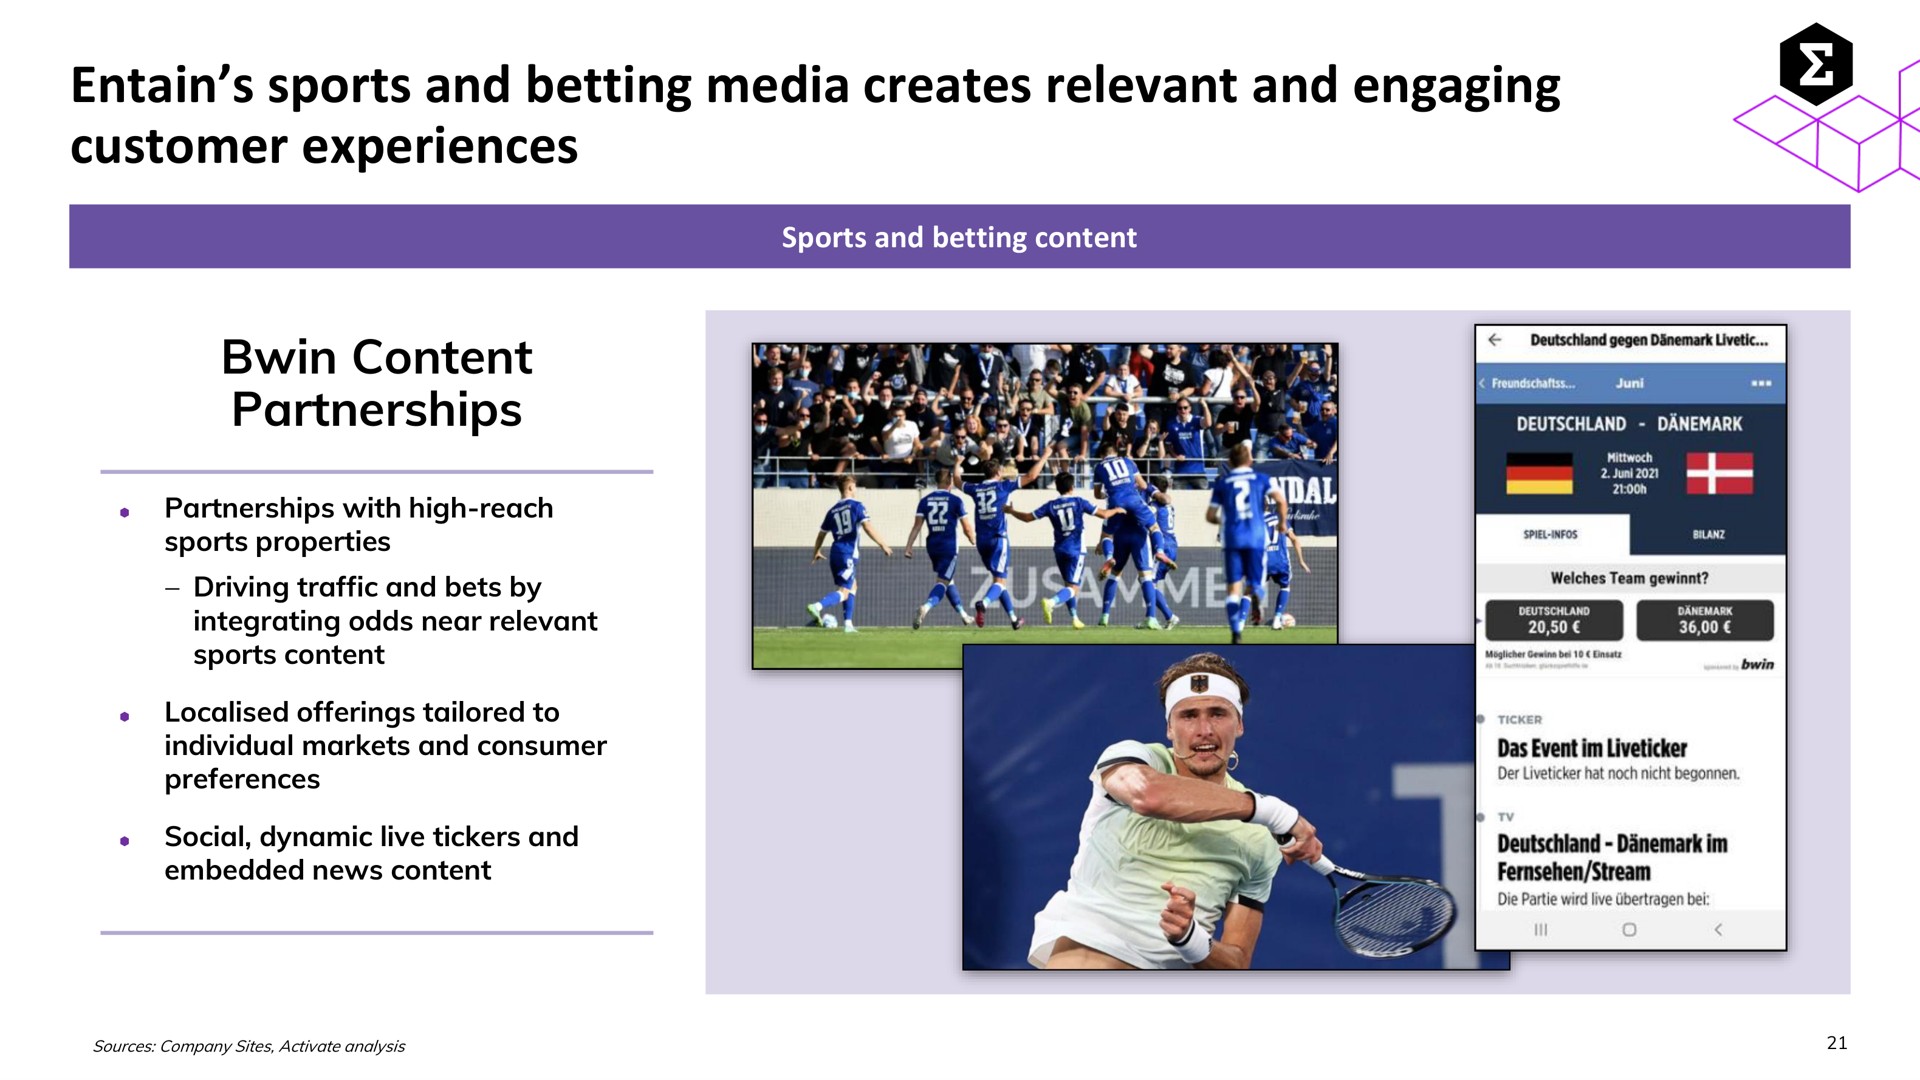 sports and betting media creates relevant and engaging customer experiences | Entain Group